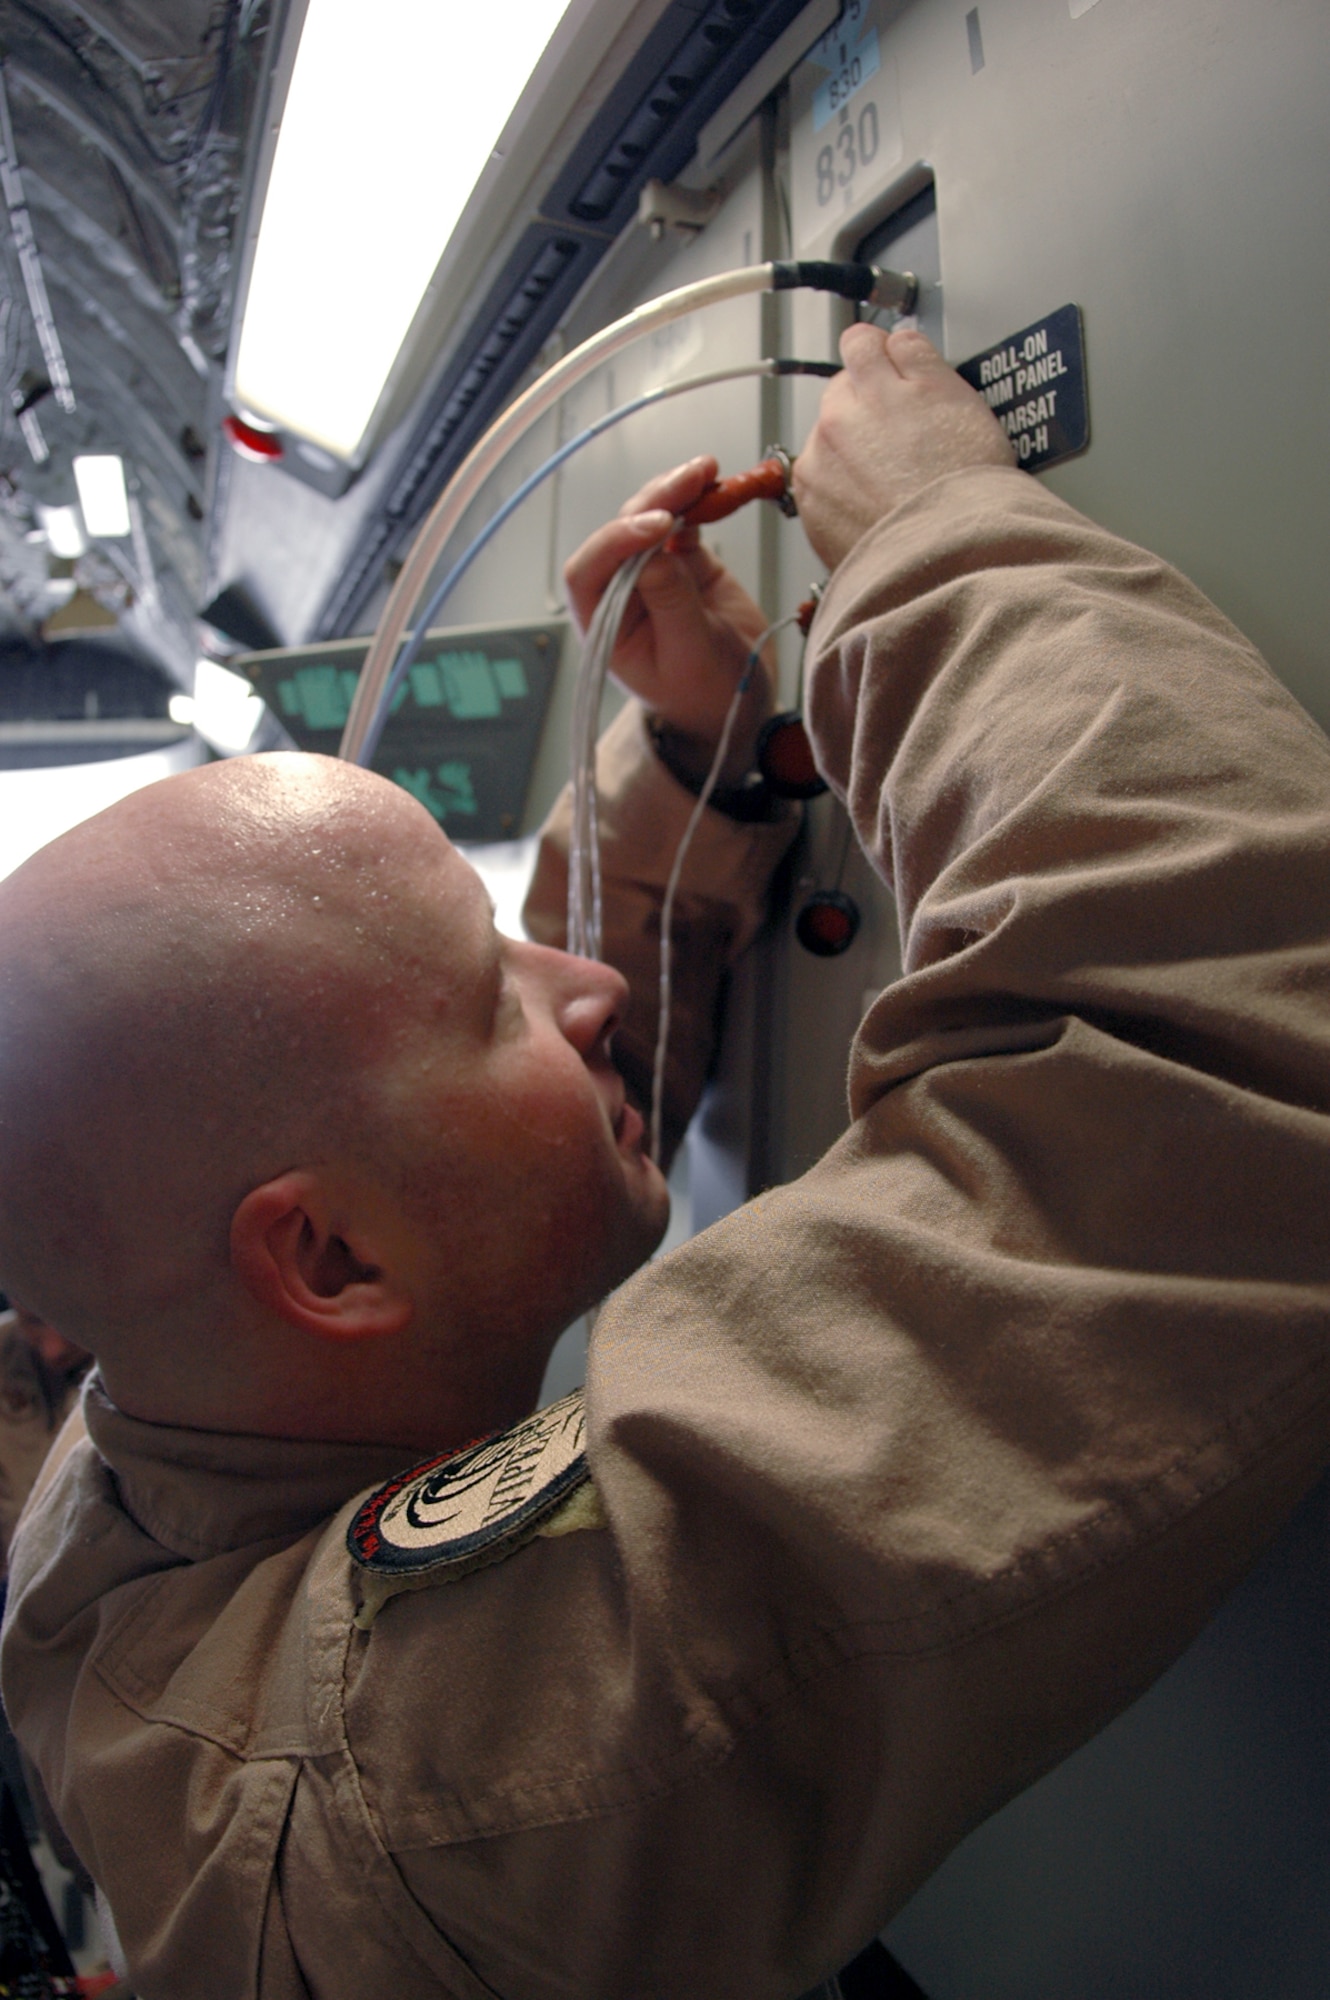 Tech. Sgt. Jason Moore, 379th Expeditionary Communications Squadron Viper Team member, connects commucations equipment aboard a C-17 before a mission Aug. 25. (U.S. Air Force photo by Senior Airman Clark Staehle)